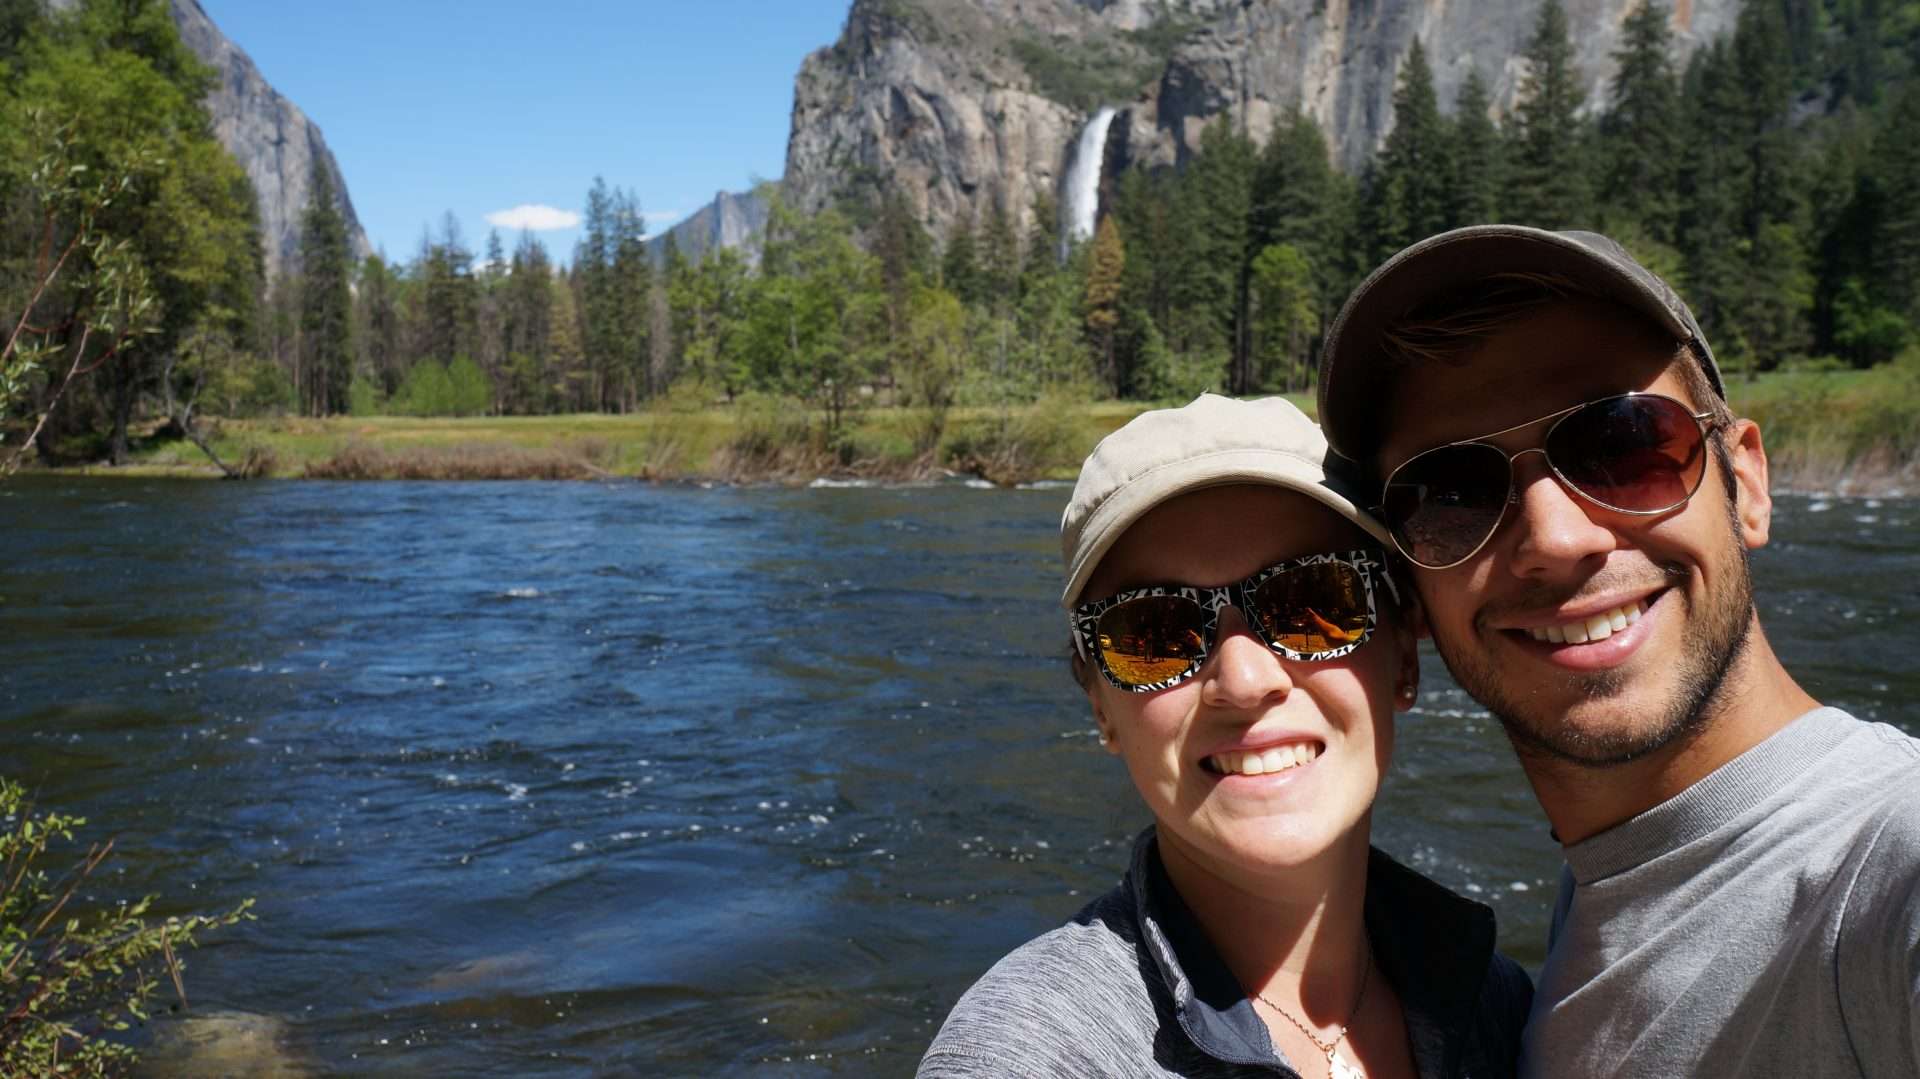 Tom and Caitlin from Mortons on the Move in Yosemite National Park